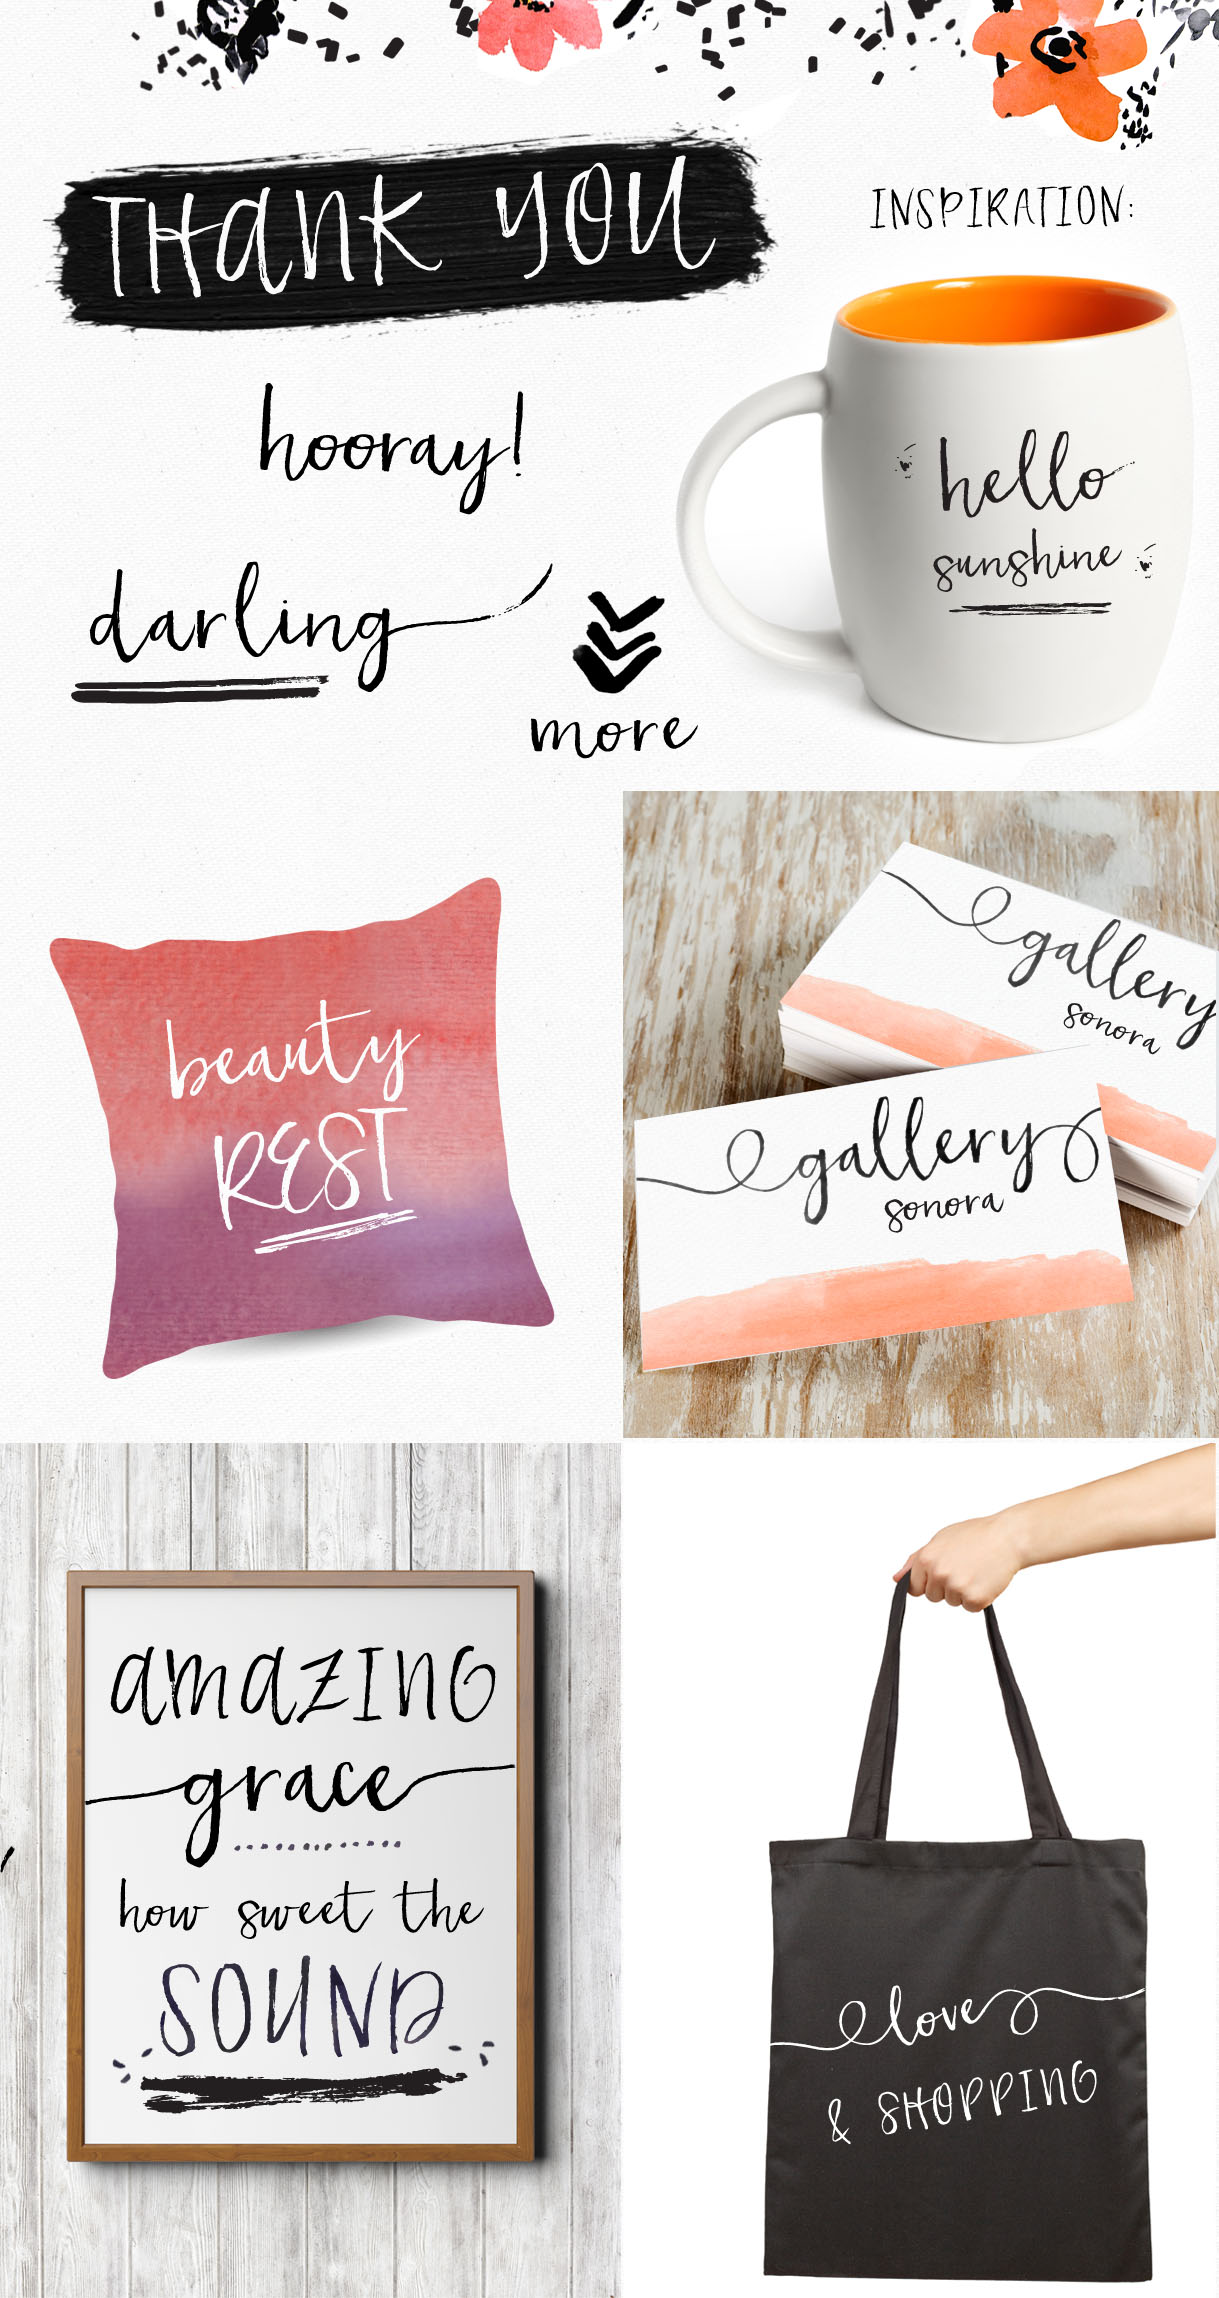 Frolicky Hand Brushed Font by Angie Makes | angiemakes.com